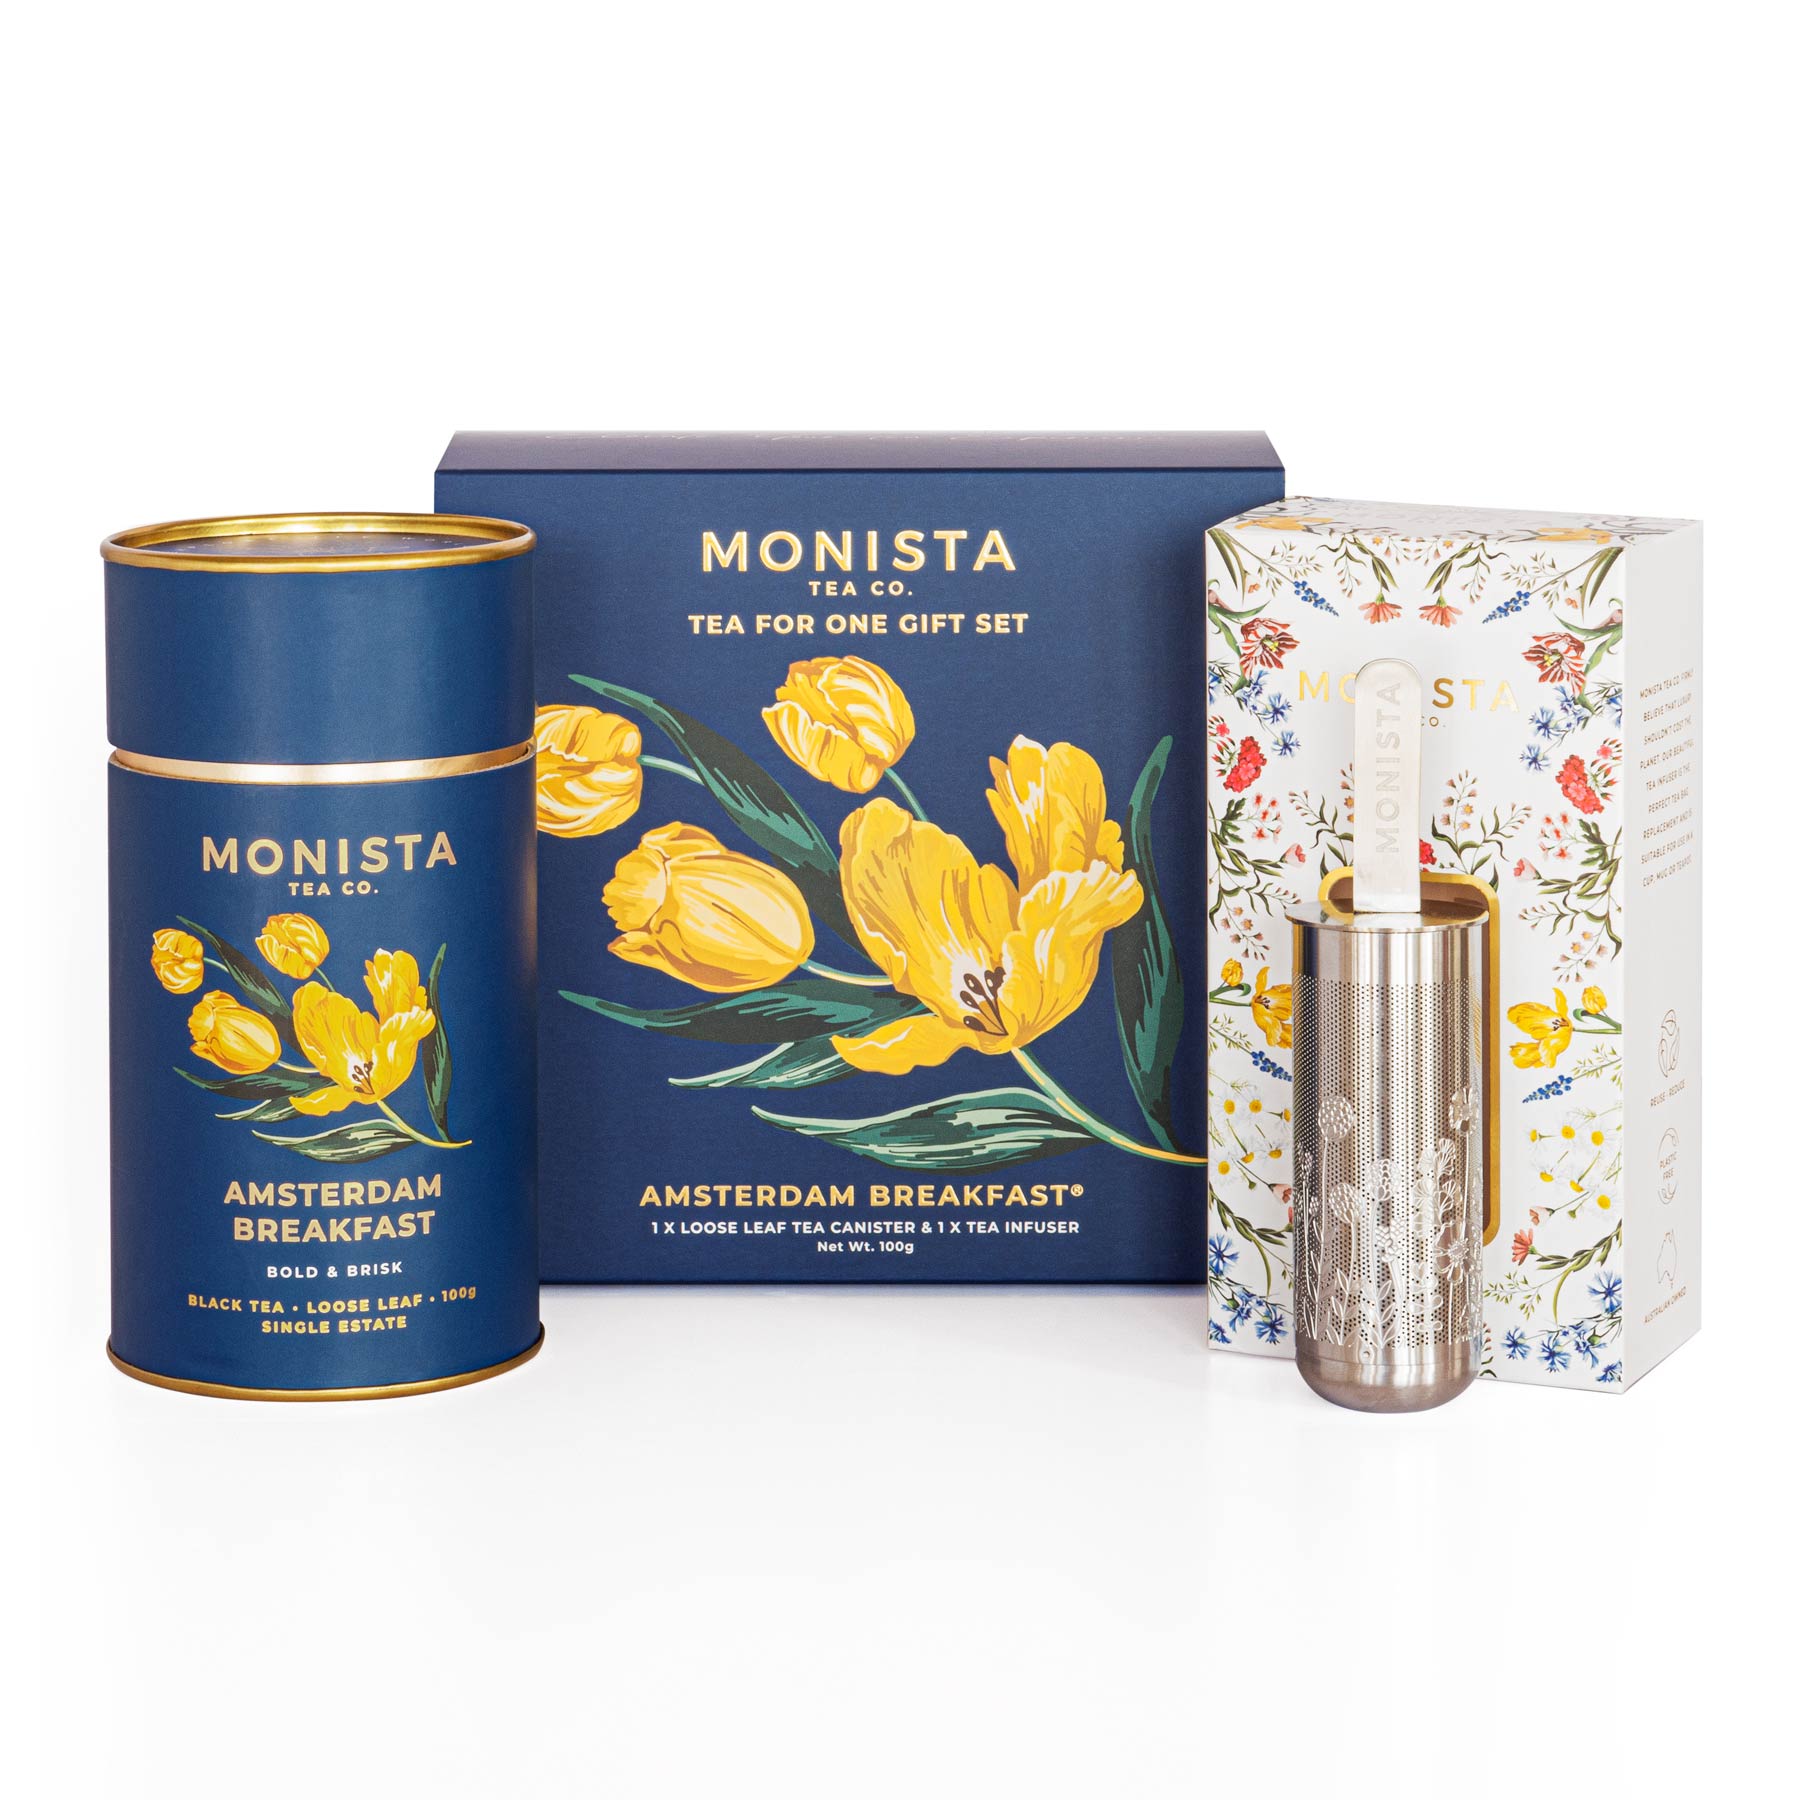 Tea gift set with canister and infuser